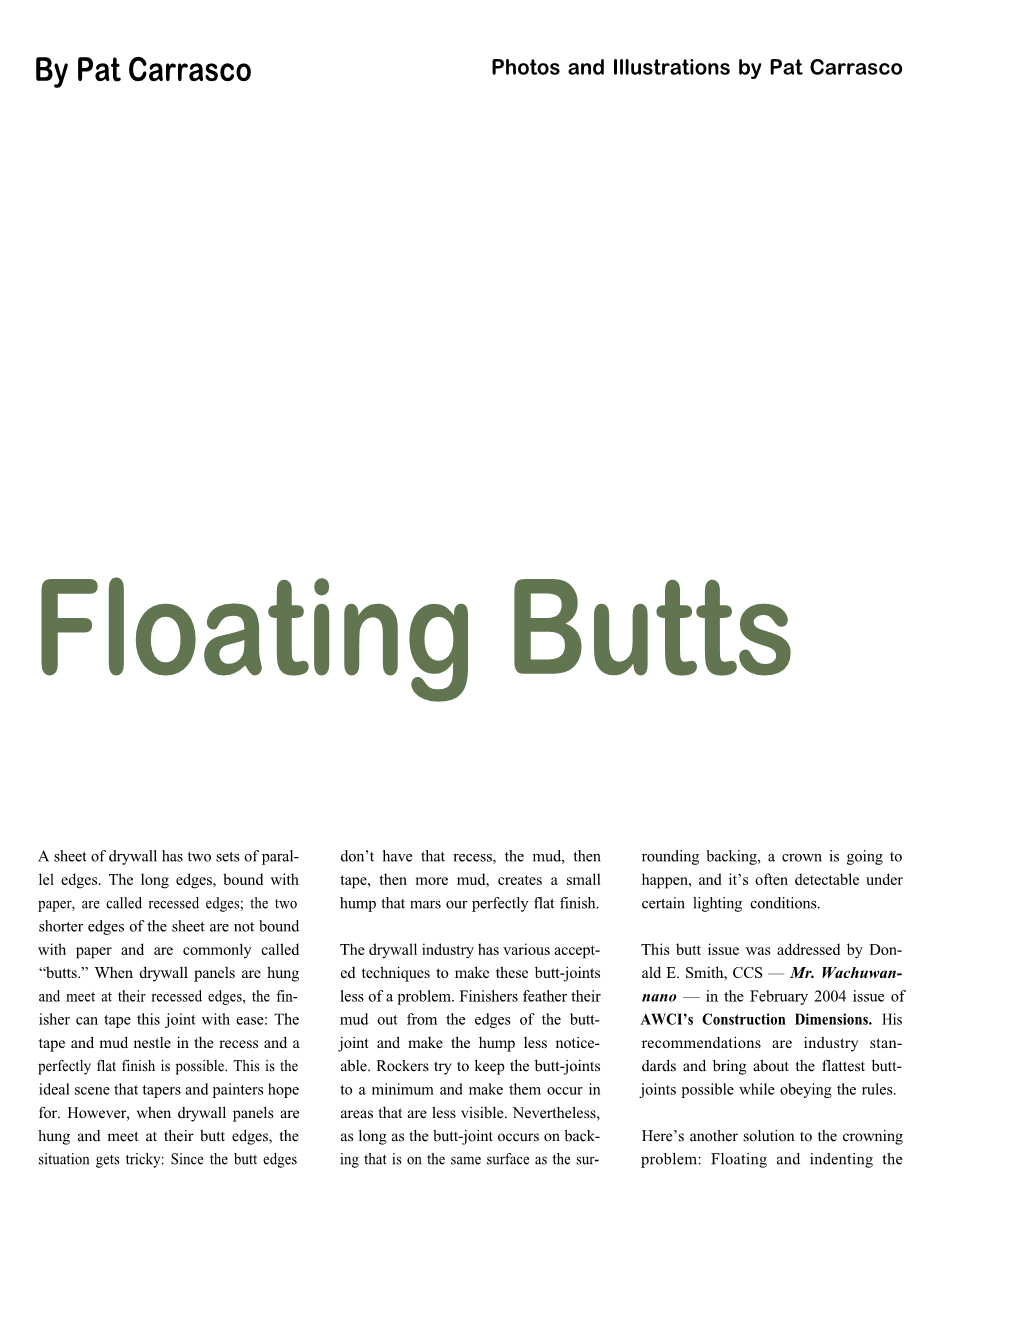 Floating Butts